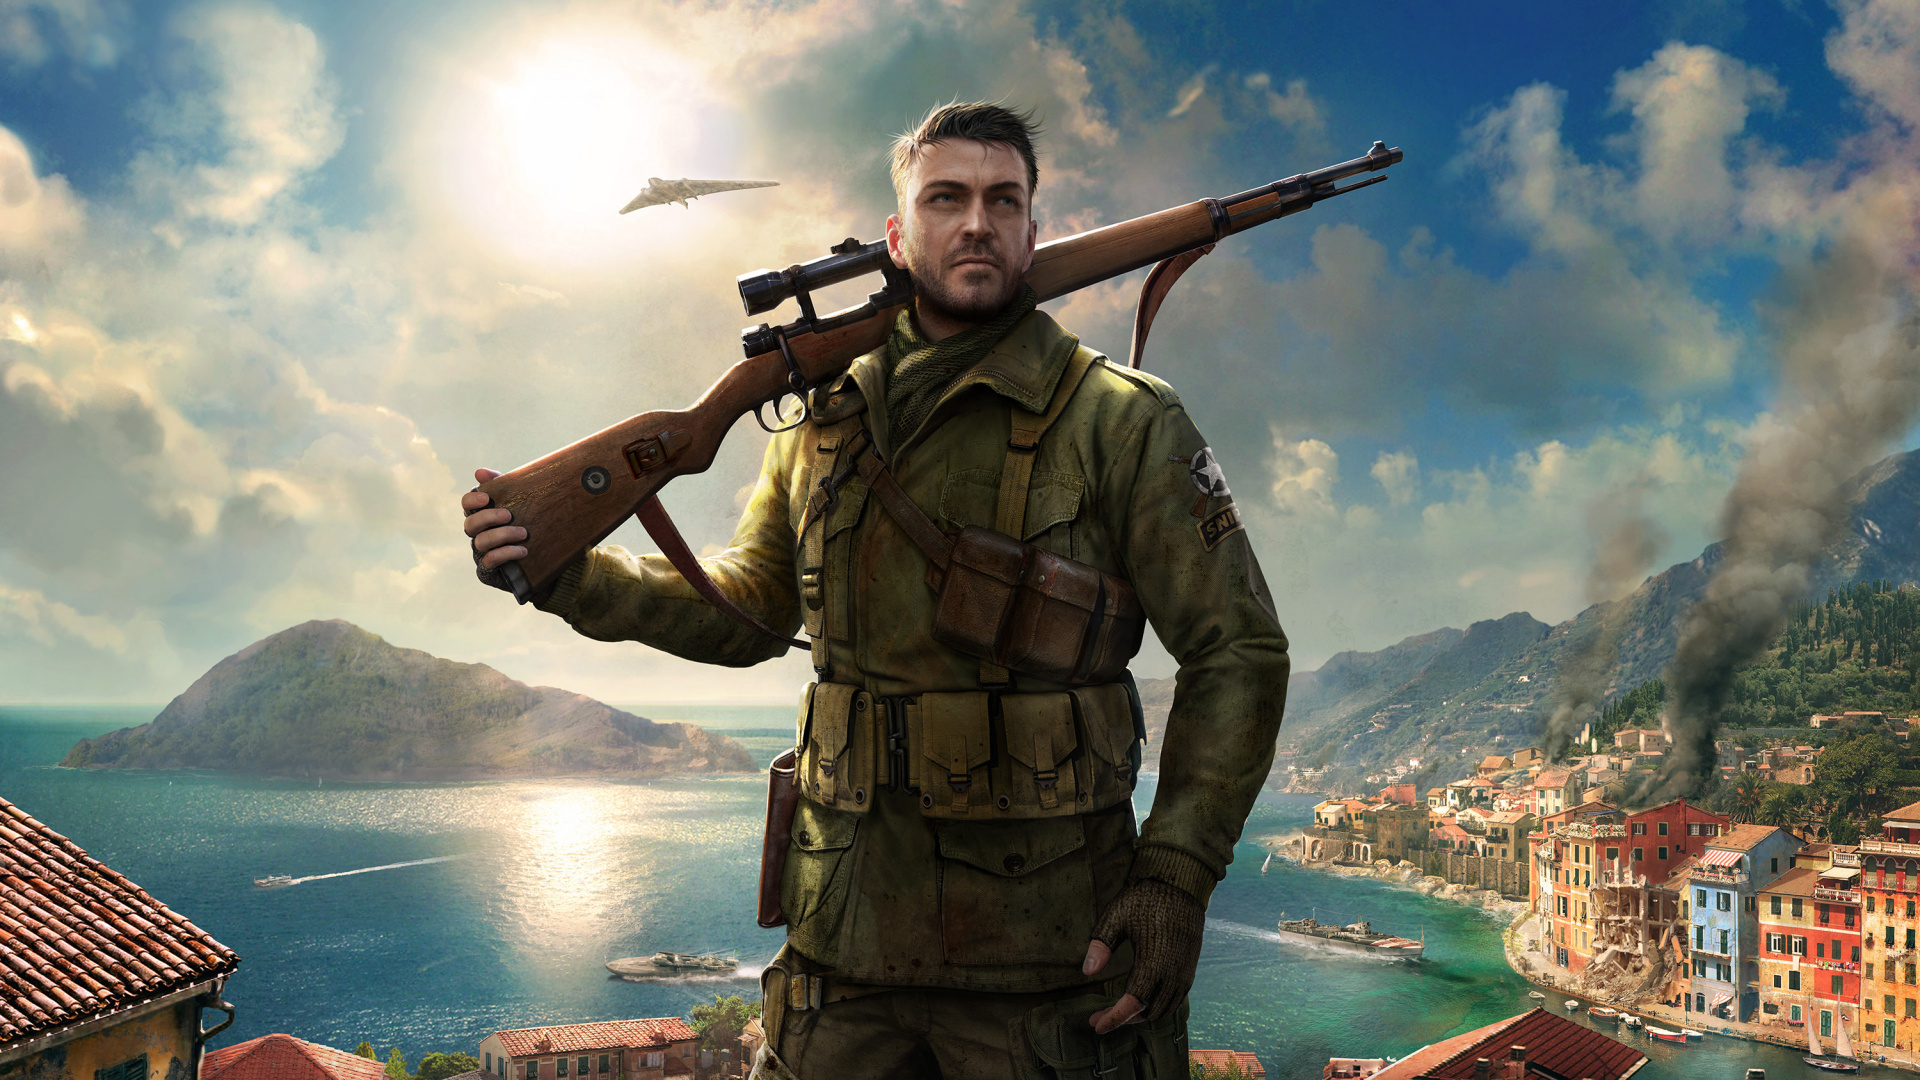 Sniper Elite 4, Shooter Game, Xbox One, Soldier, pc Game. Wallpaper in 1920x1080 Resolution